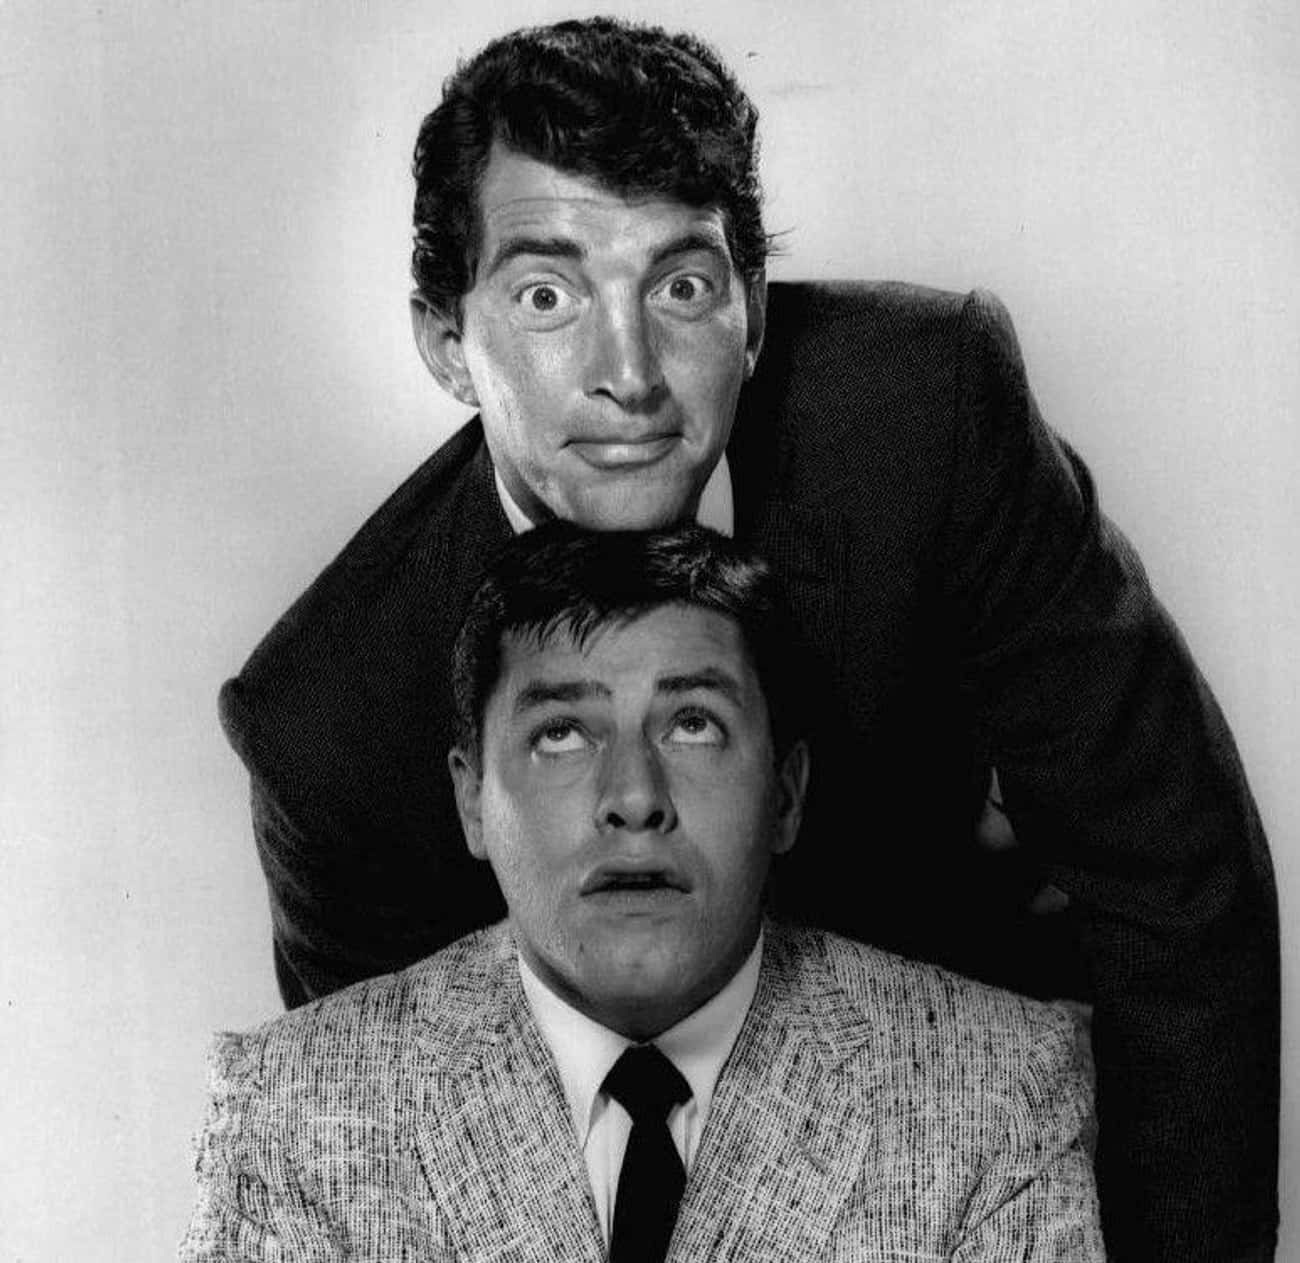 Groucho Told Jerry Lewis To ‘Sit Down Alone, And Talk It Out’ Before Ending His Partnership With Dean Martin